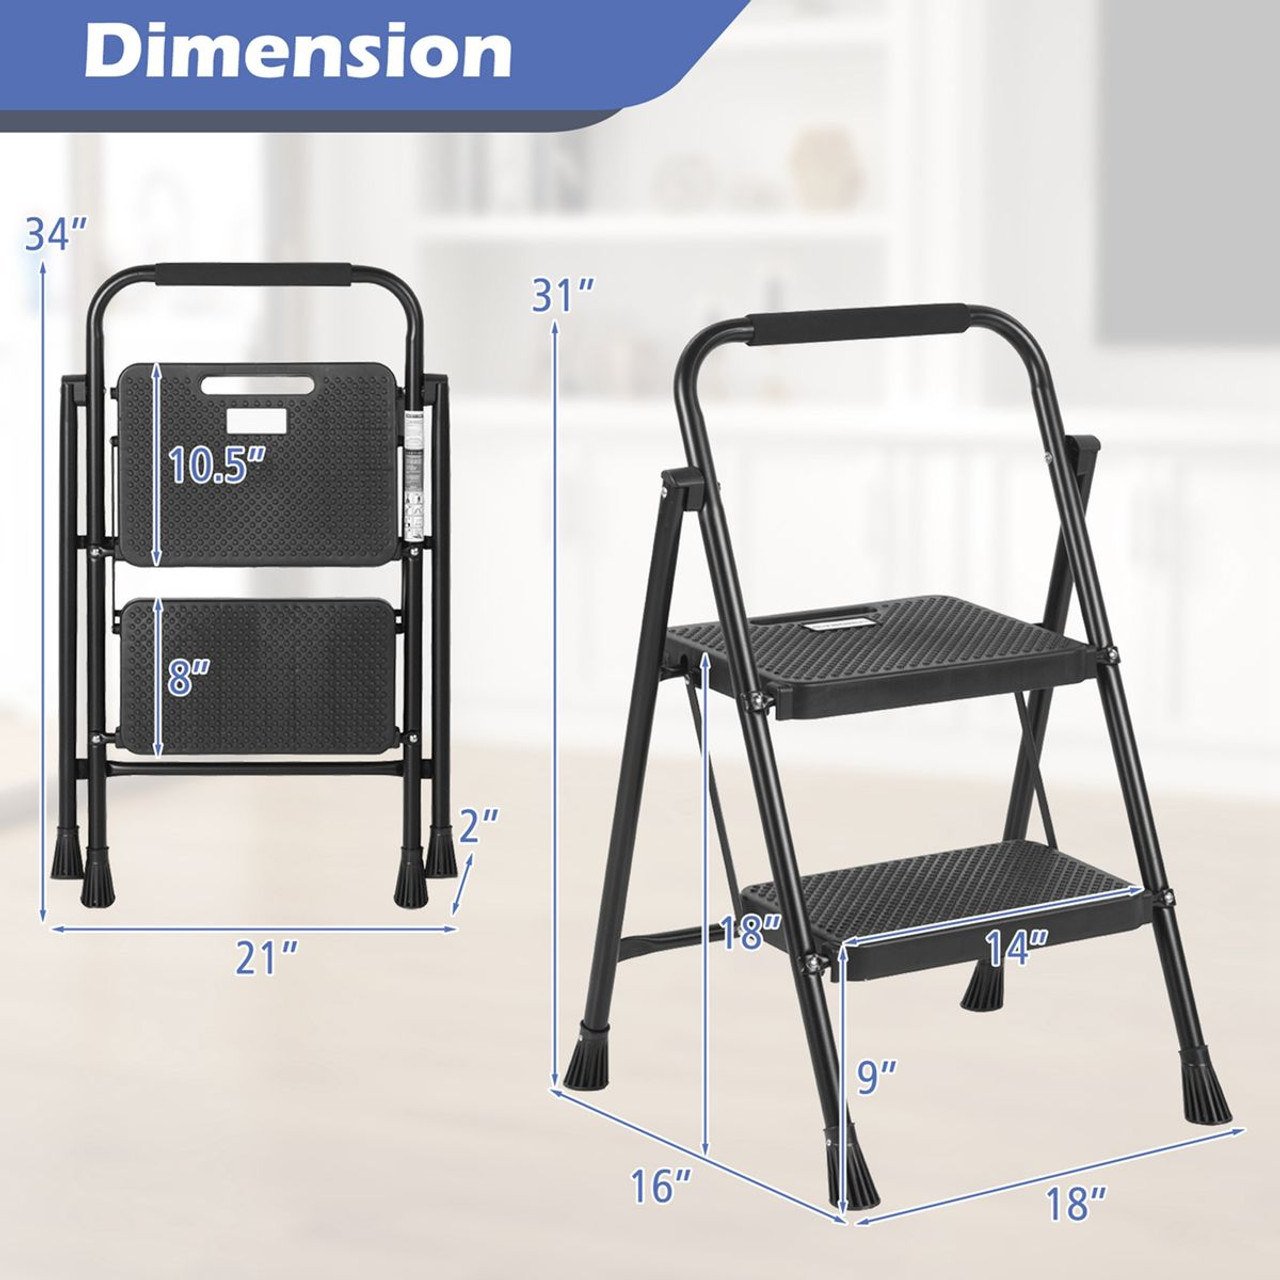 Portable Folding 2-Step Ladder with Anti-Slip Pedal product image